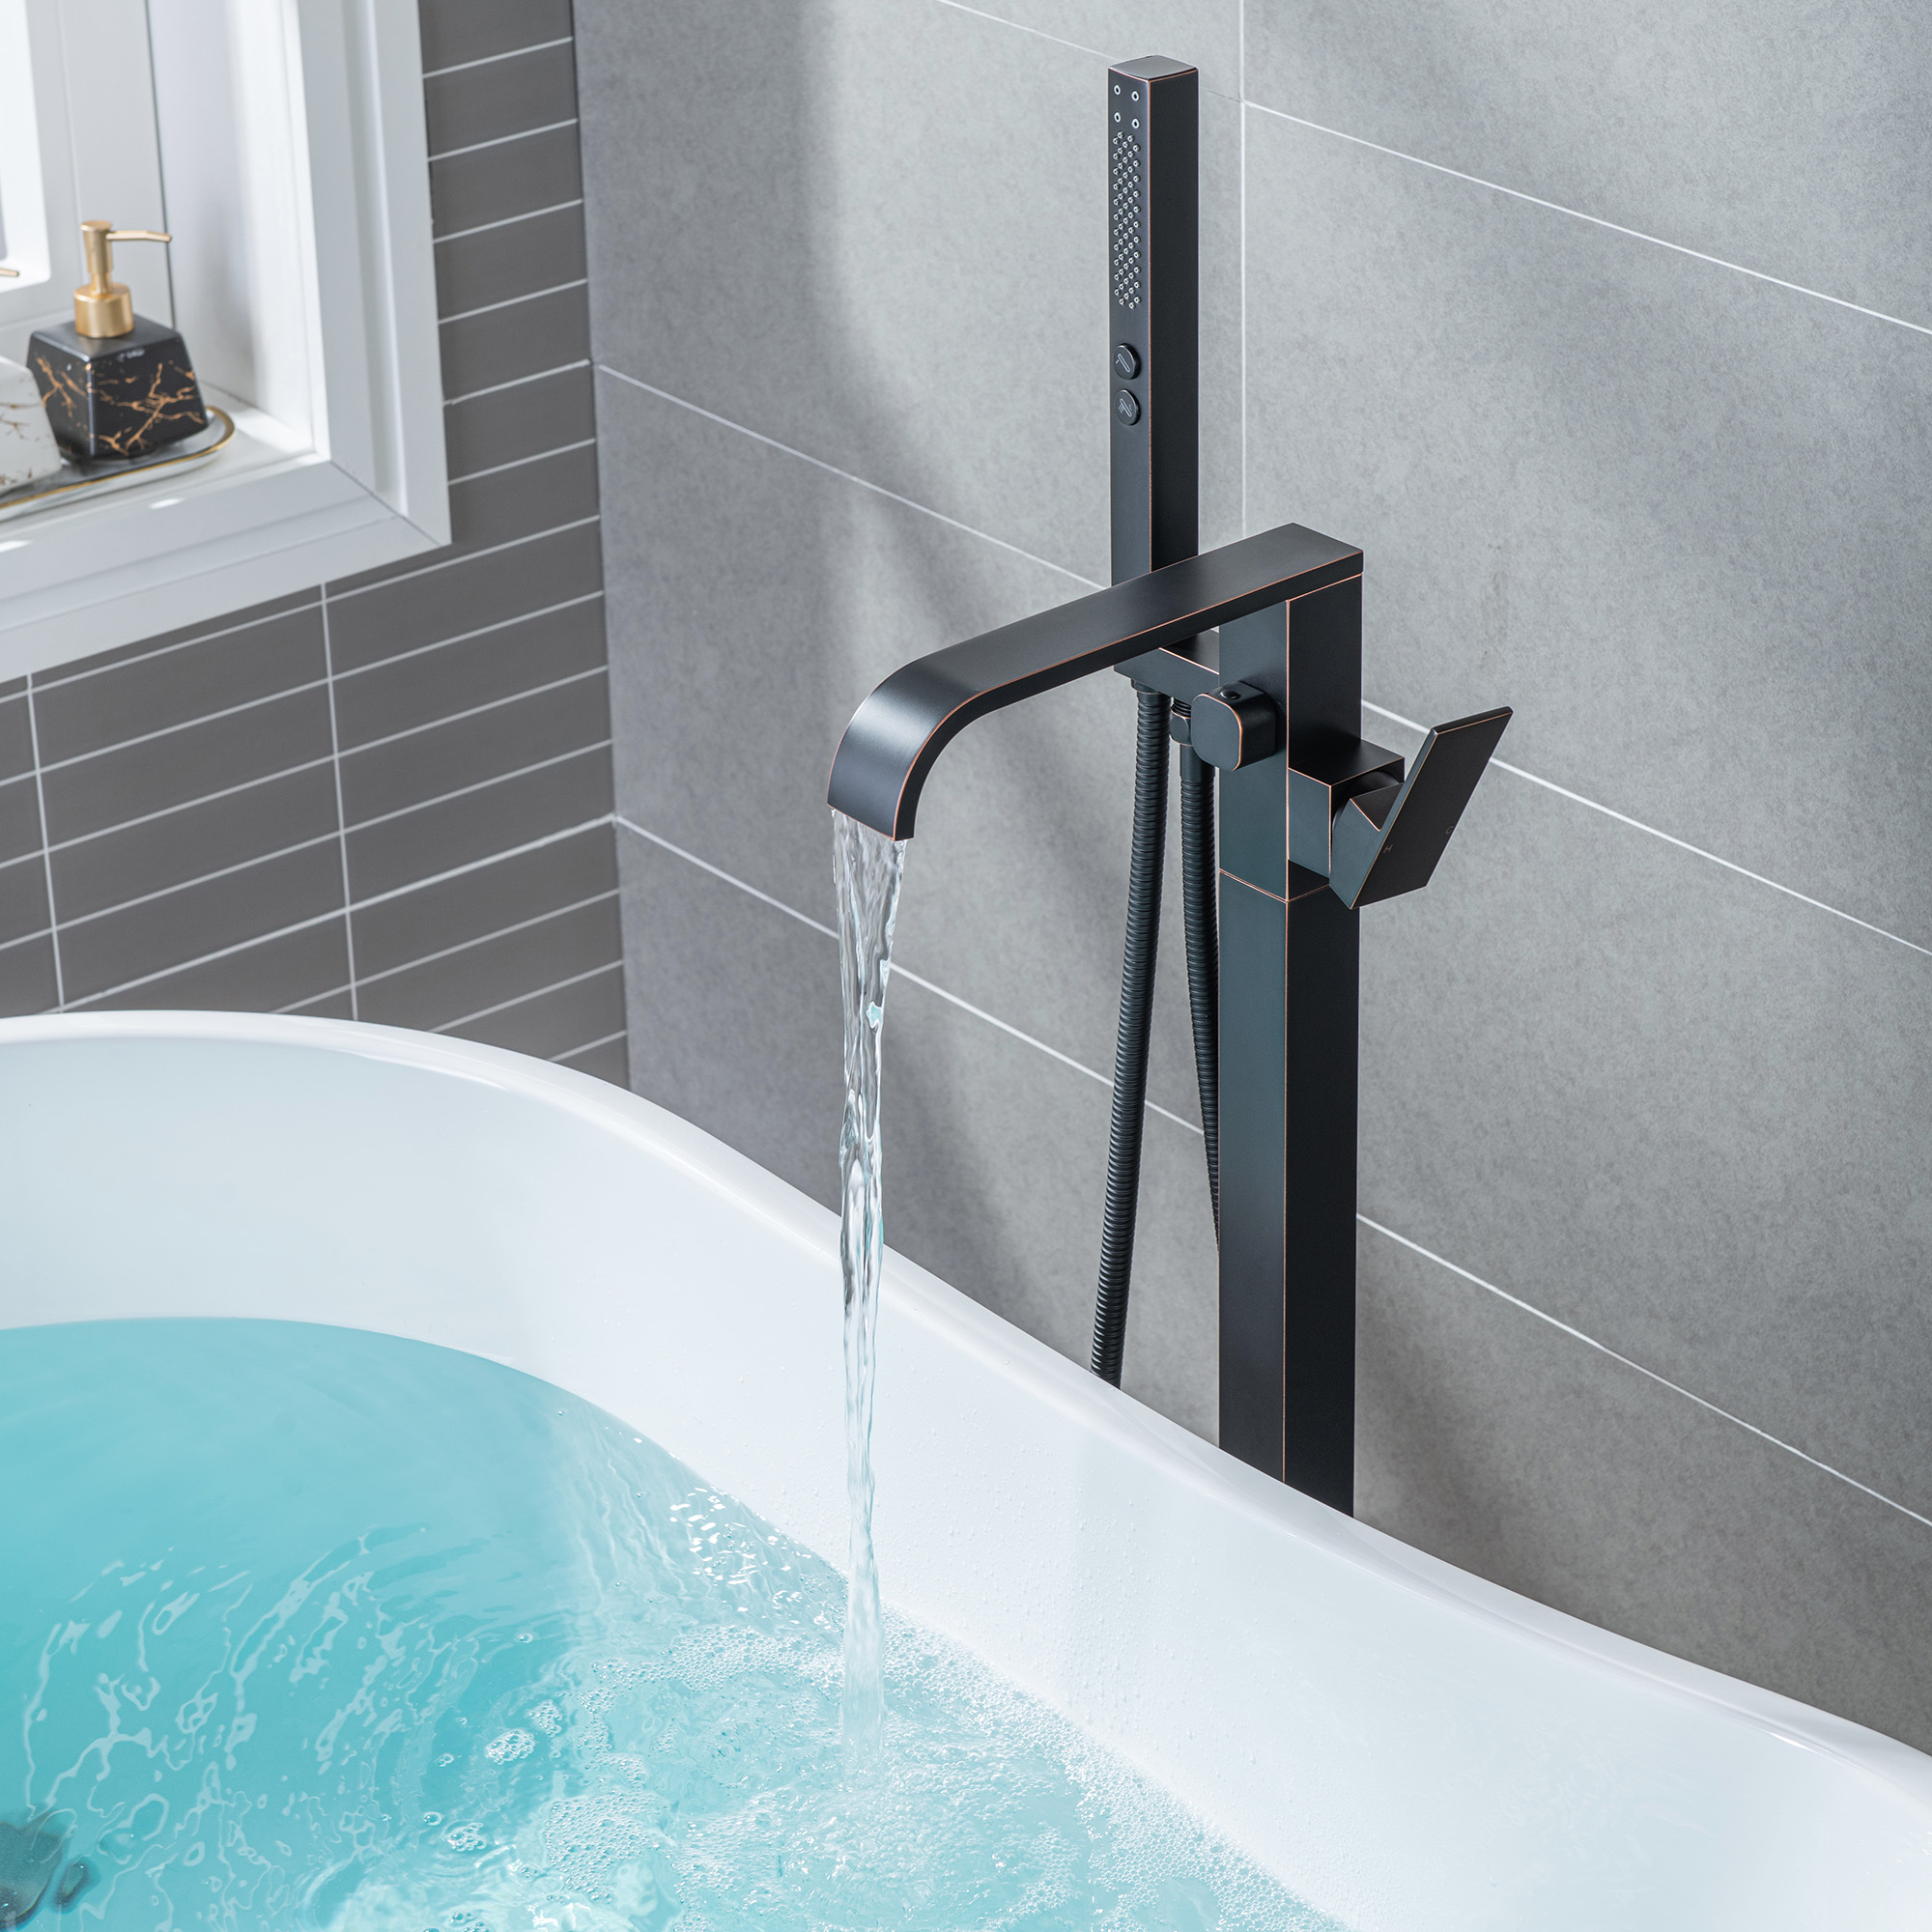  WOODBRIDGE F0038ORB Contemporary Single Handle Floor Mount Freestanding Tub Filler Faucet with Hand shower in Oil Rubbed Bronze Finish._12816